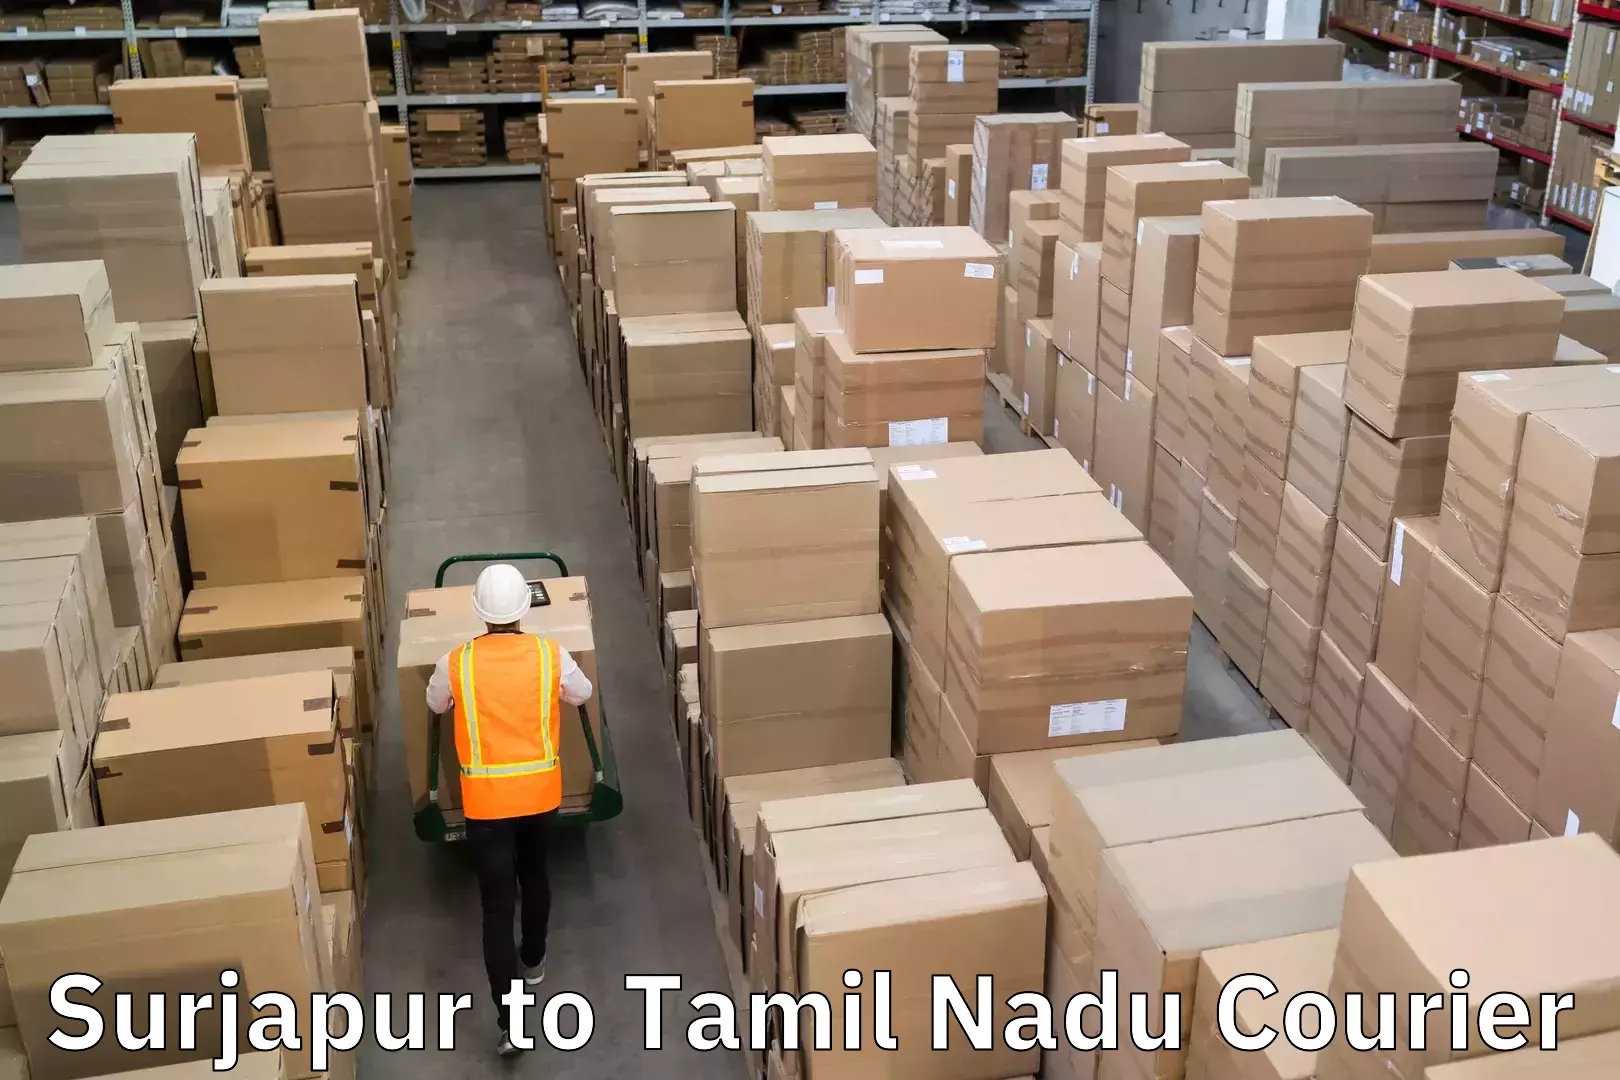 Efficient package consolidation Surjapur to Tamil Nadu